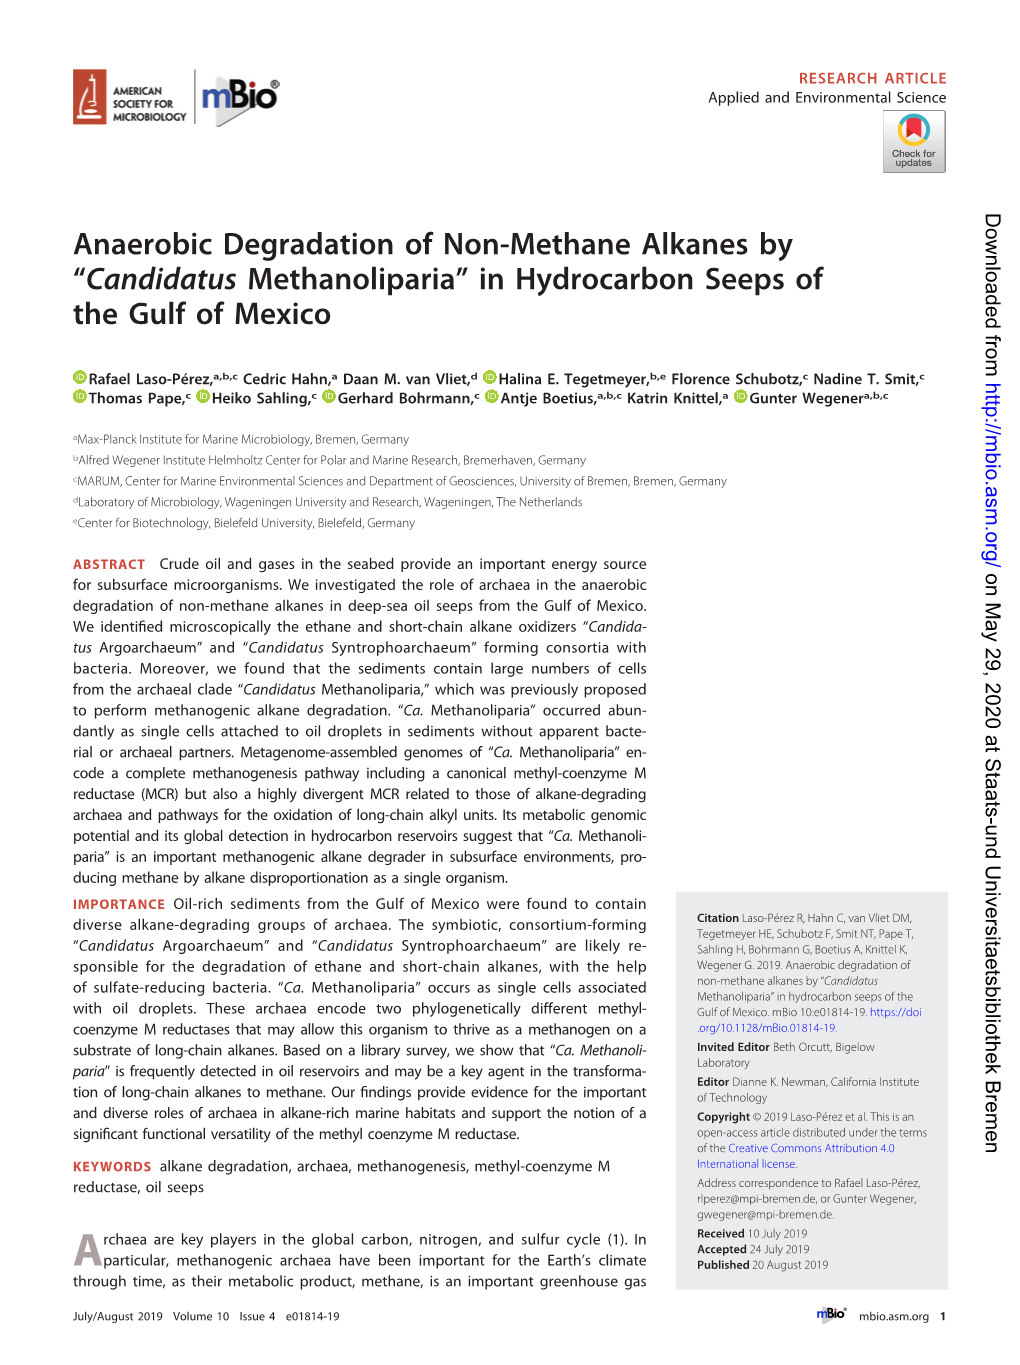 Anaerobic Degradation of Non-Methane Alkanes by “Candidatus Methanoliparia” in Hydrocarbon Seeps of the Gulf of Mexico